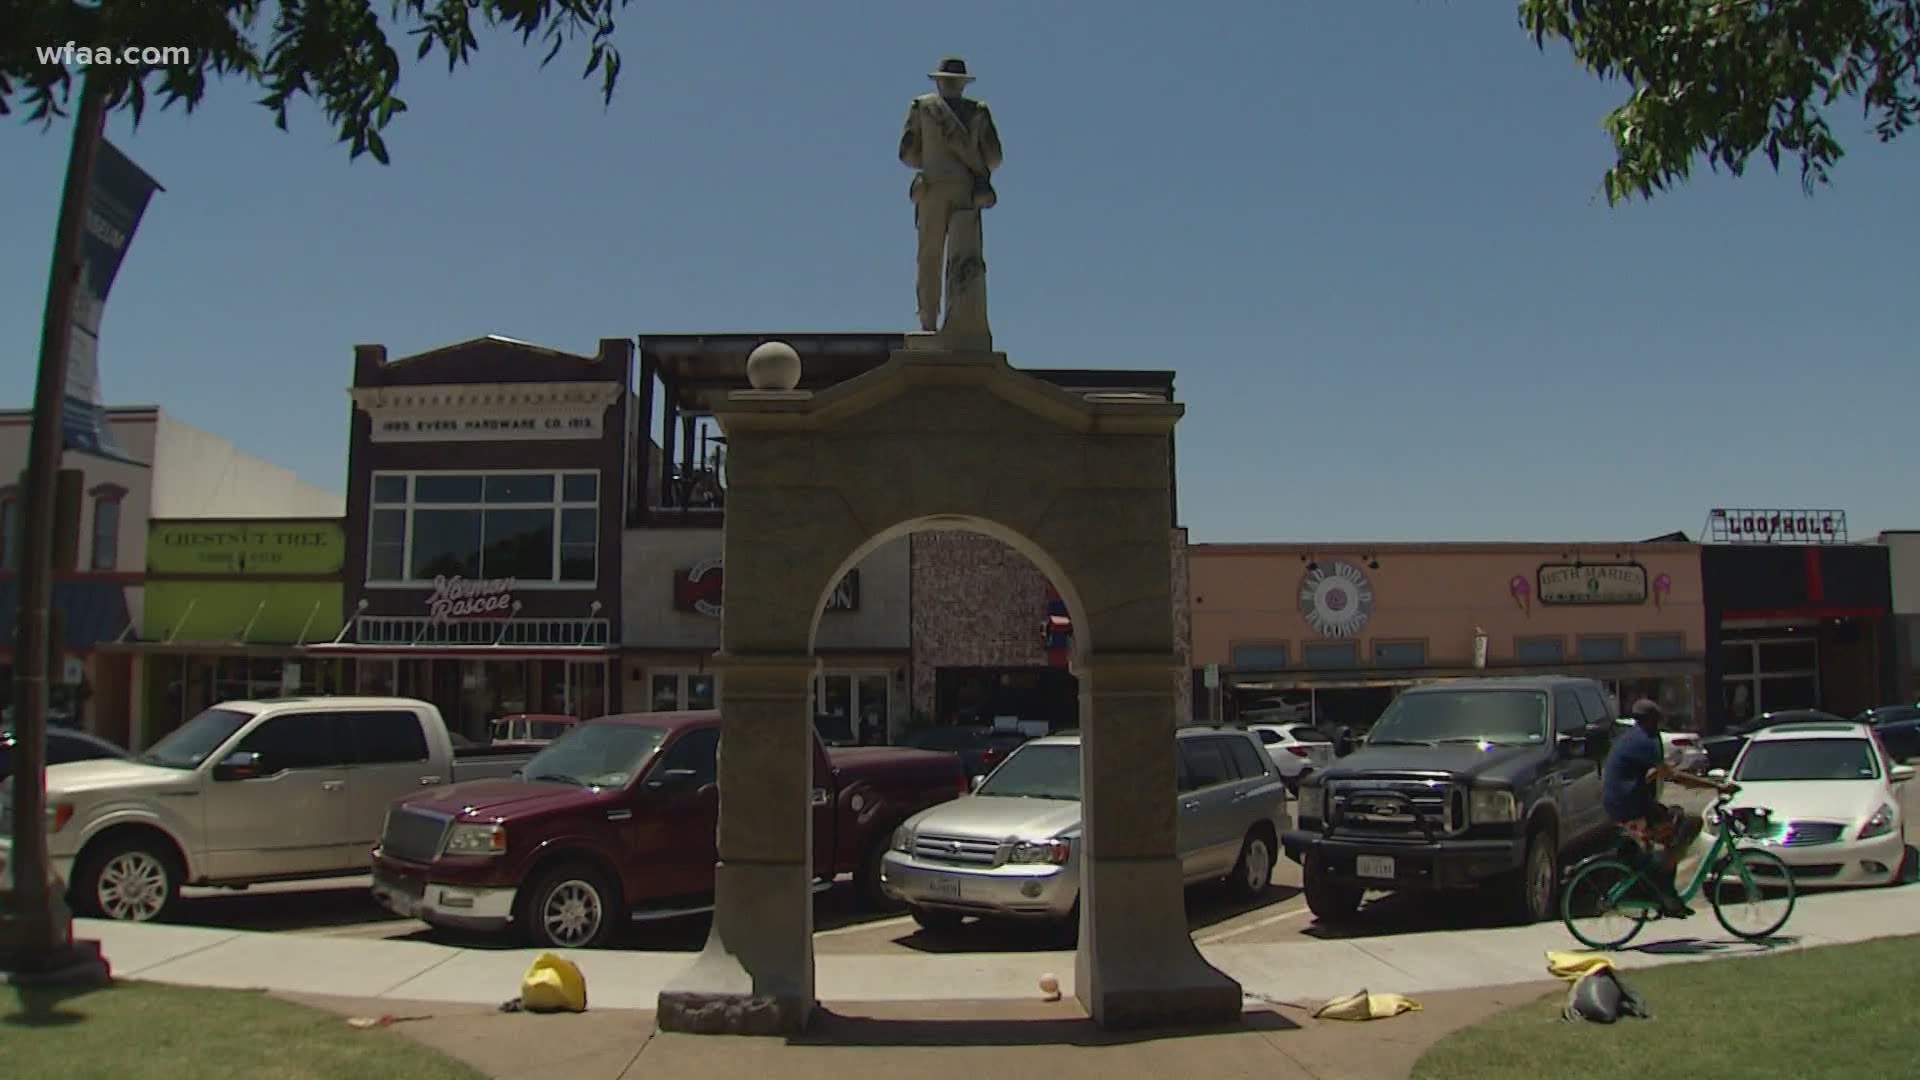 Denton County commissioners voted 5-0 to remove the statue.